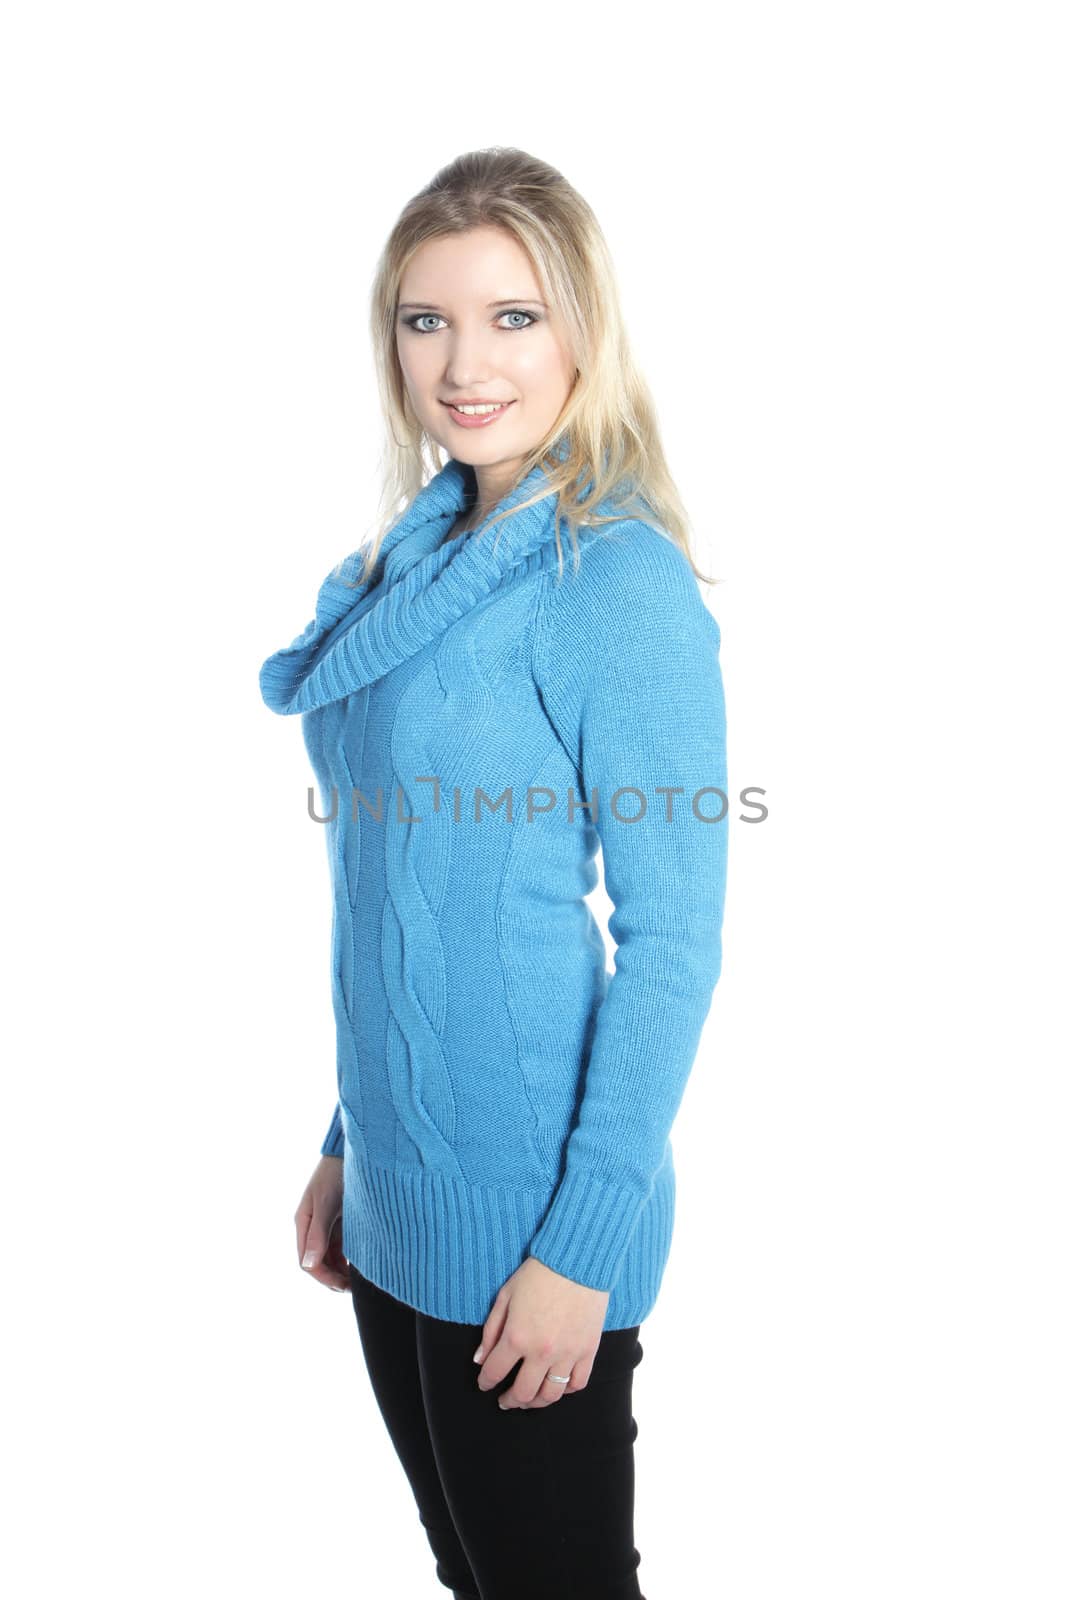 Blonde casual woman standing over the white background